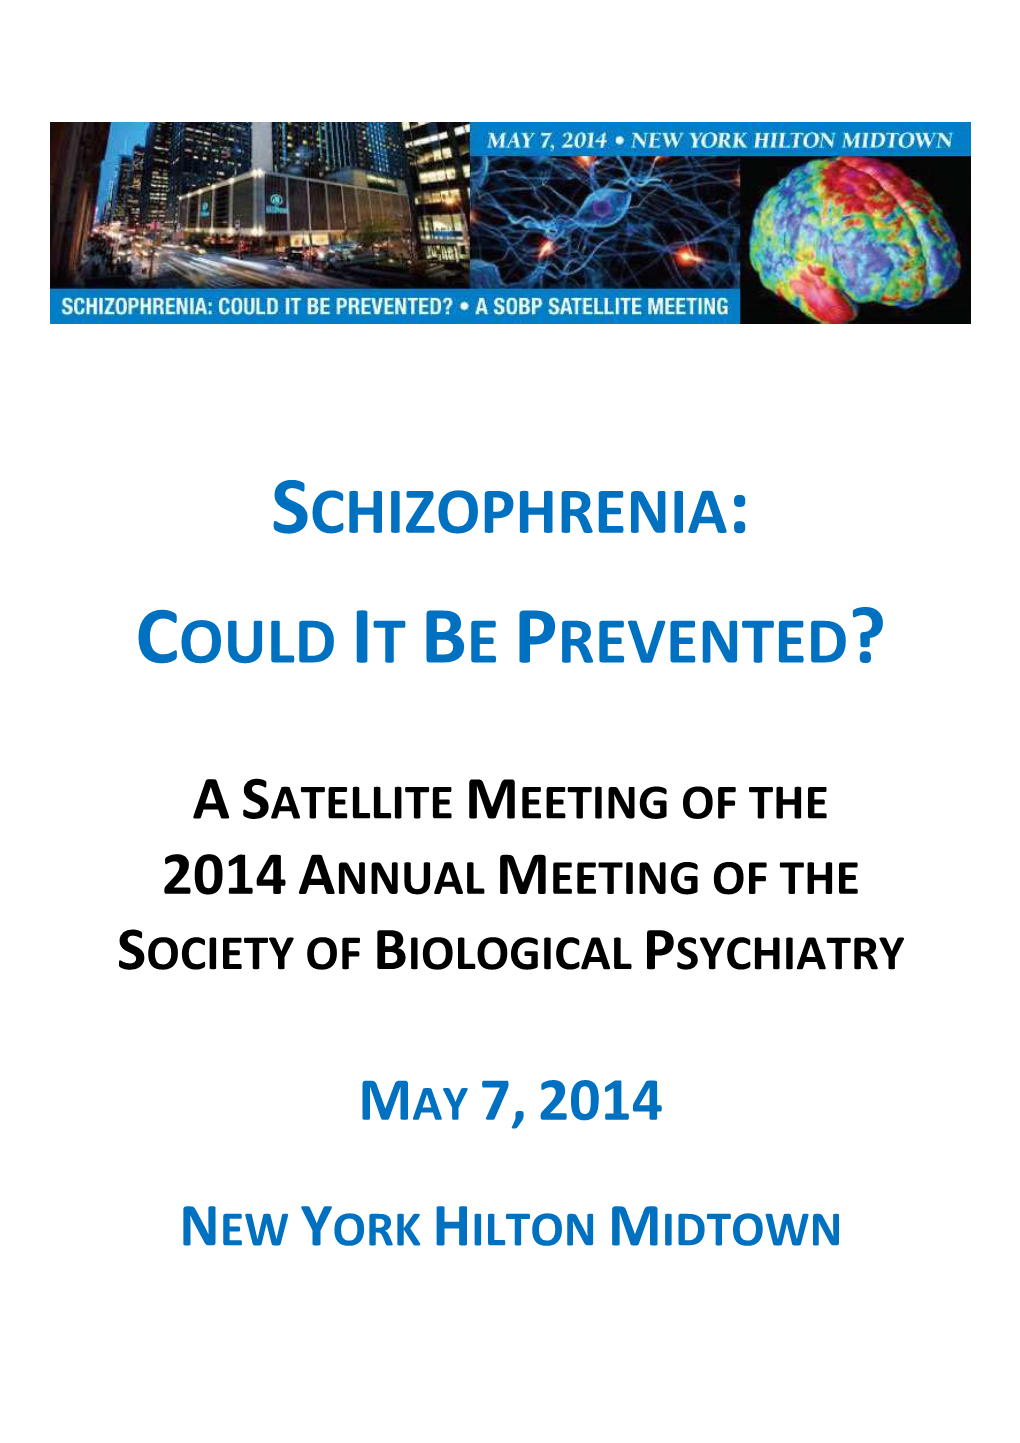 Schizophrenia: Could It Be Prevented?